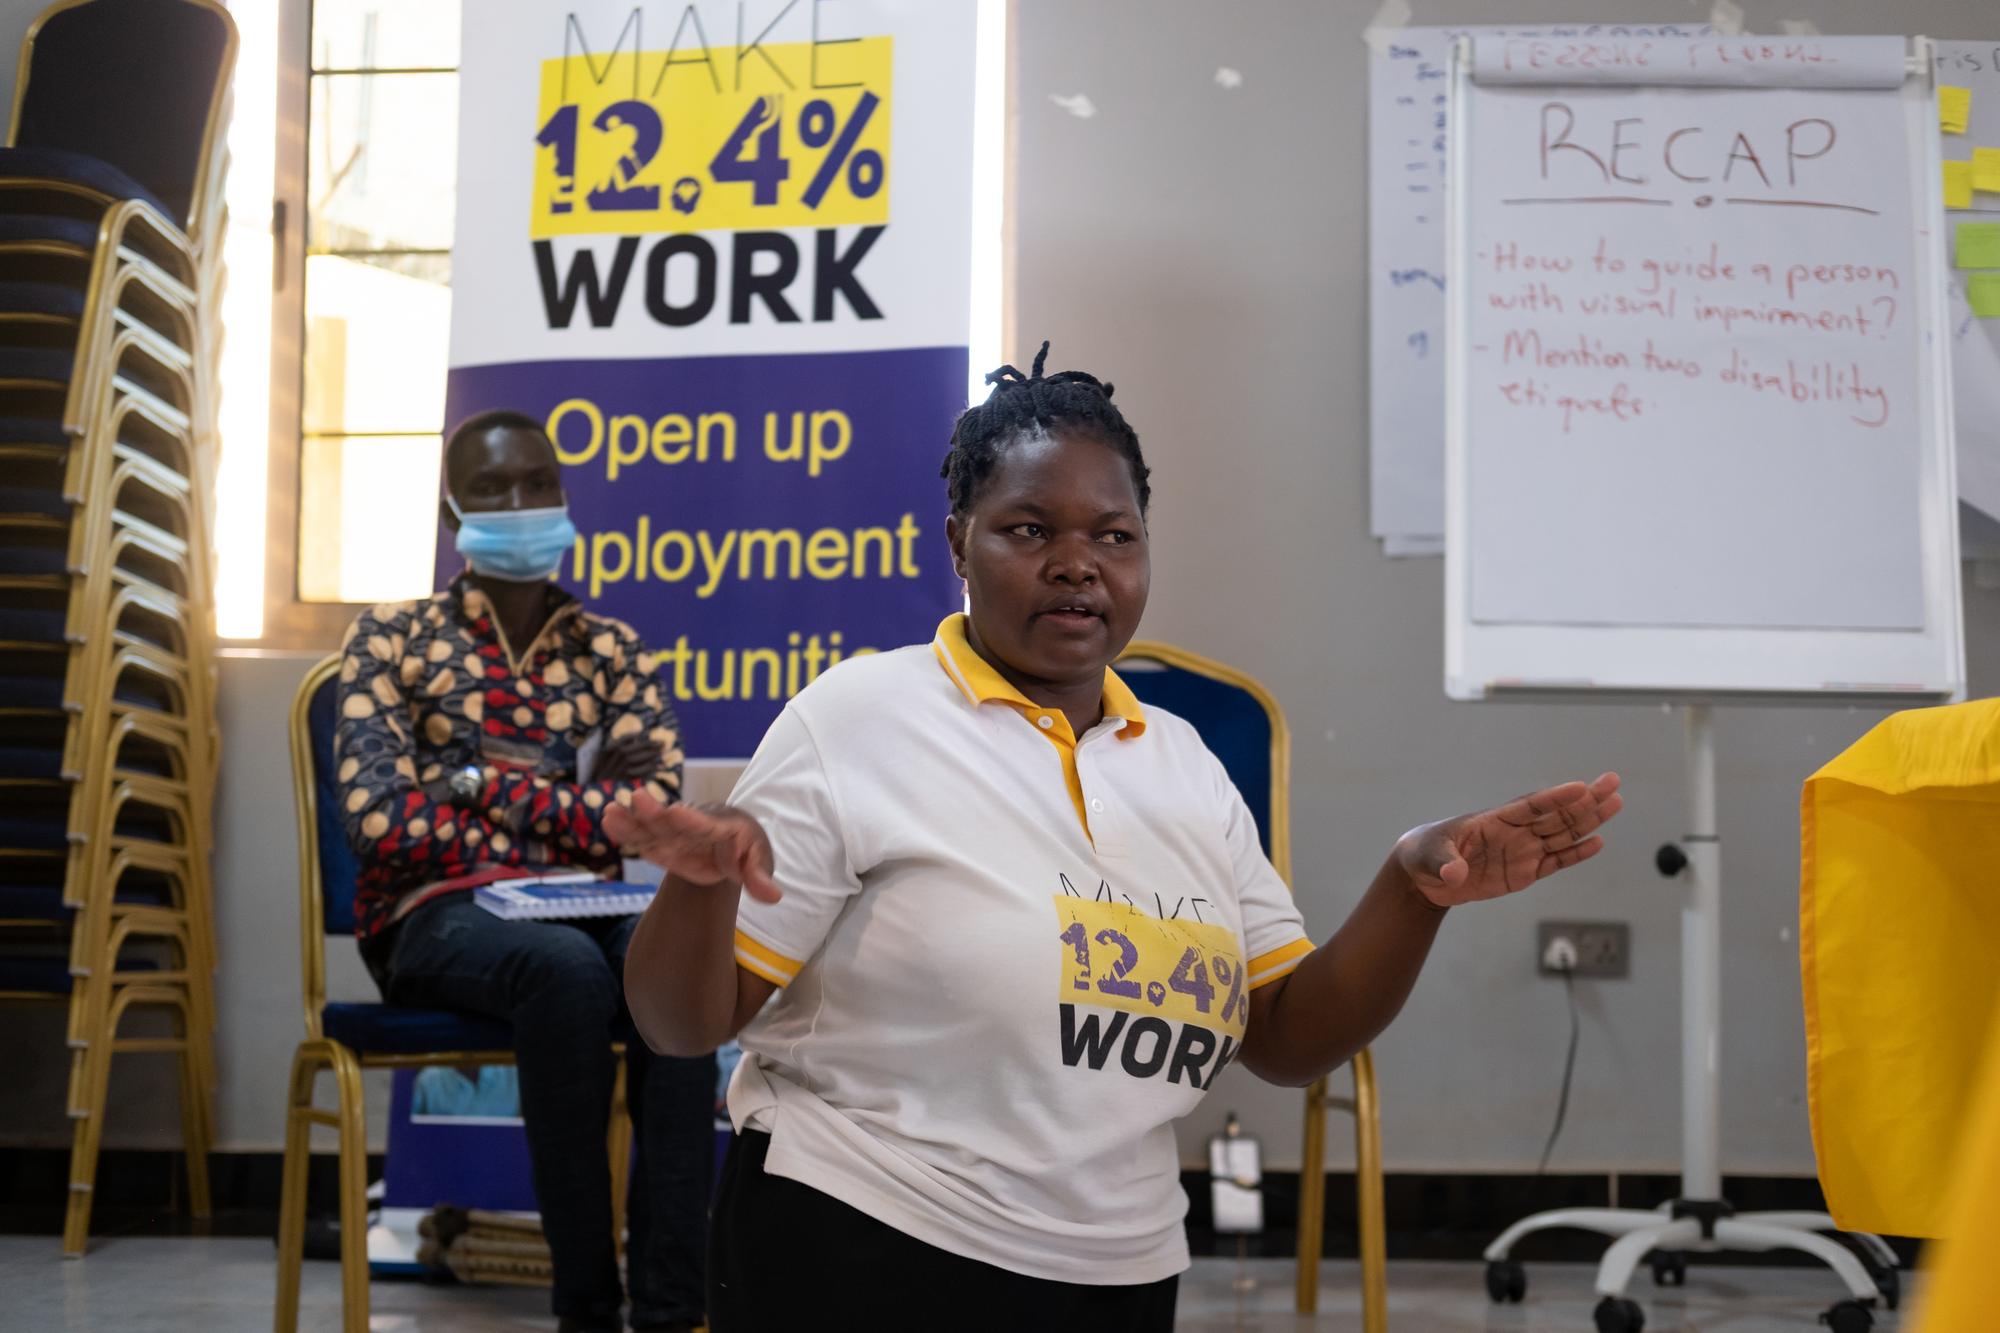 Cony Adoch, a Disability Inclusion Facilitator, leads a workshop as part of the Make 12.4% Work initiative in Uganda